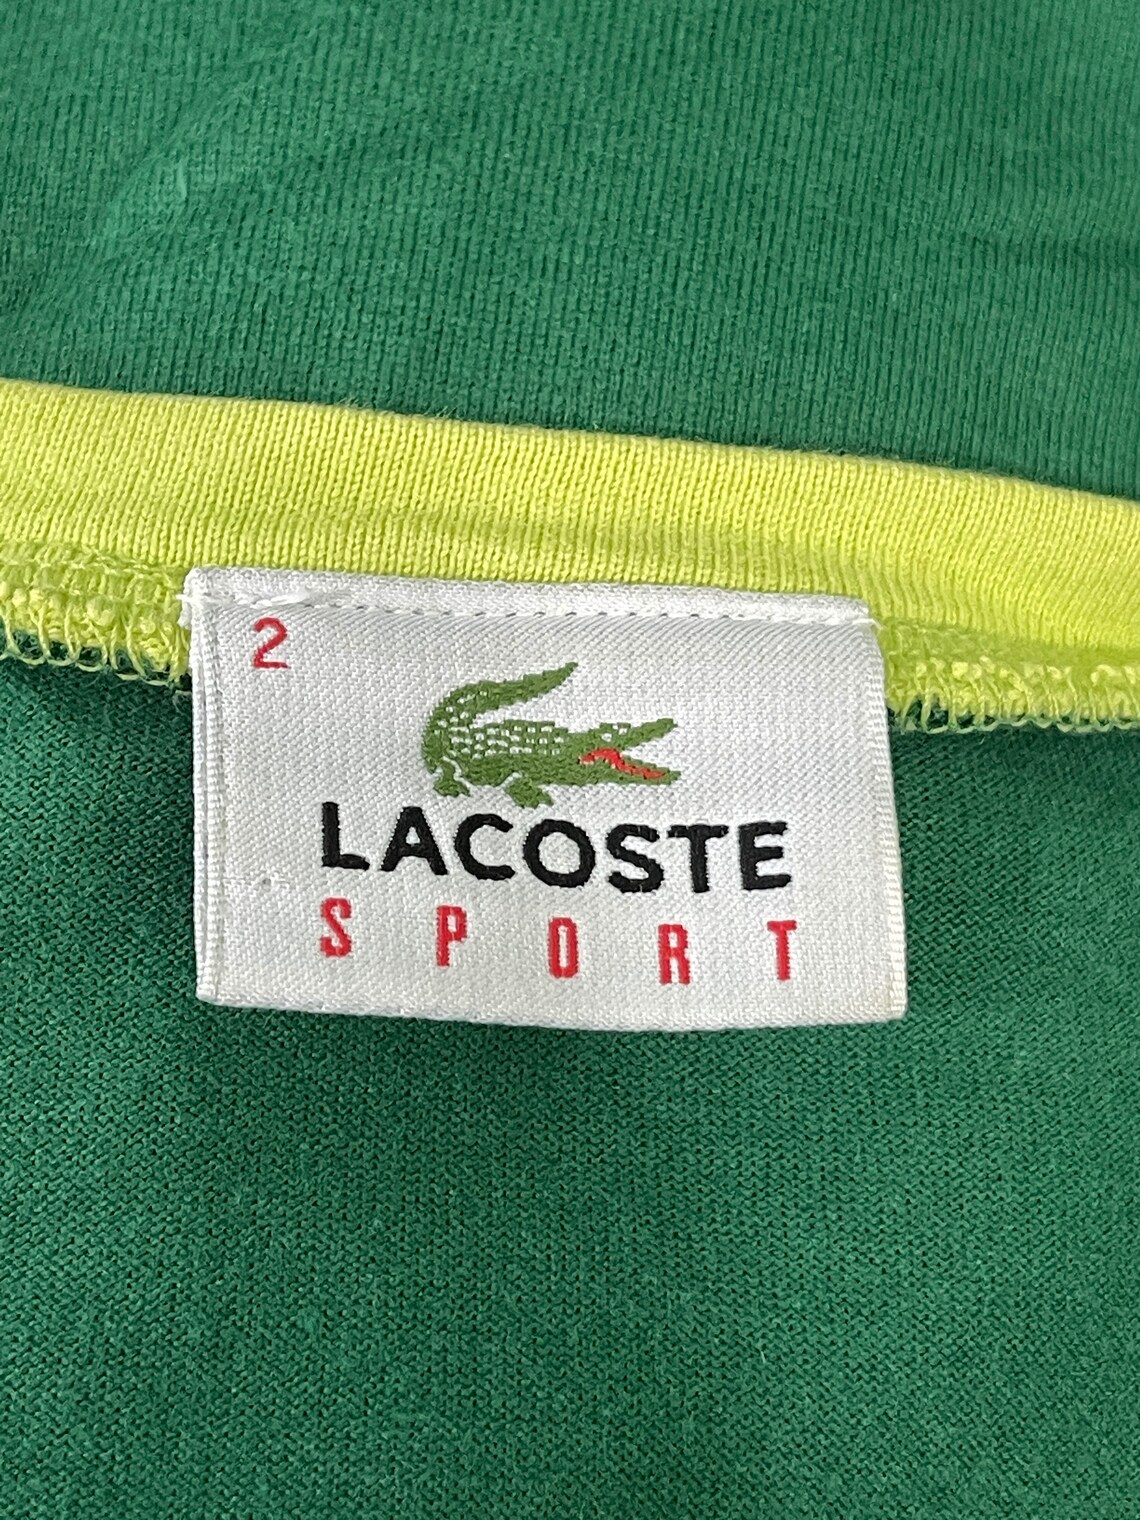 Vintage Lacoste Big Embroidery Logo T-Shirt code:KAO | Etsy